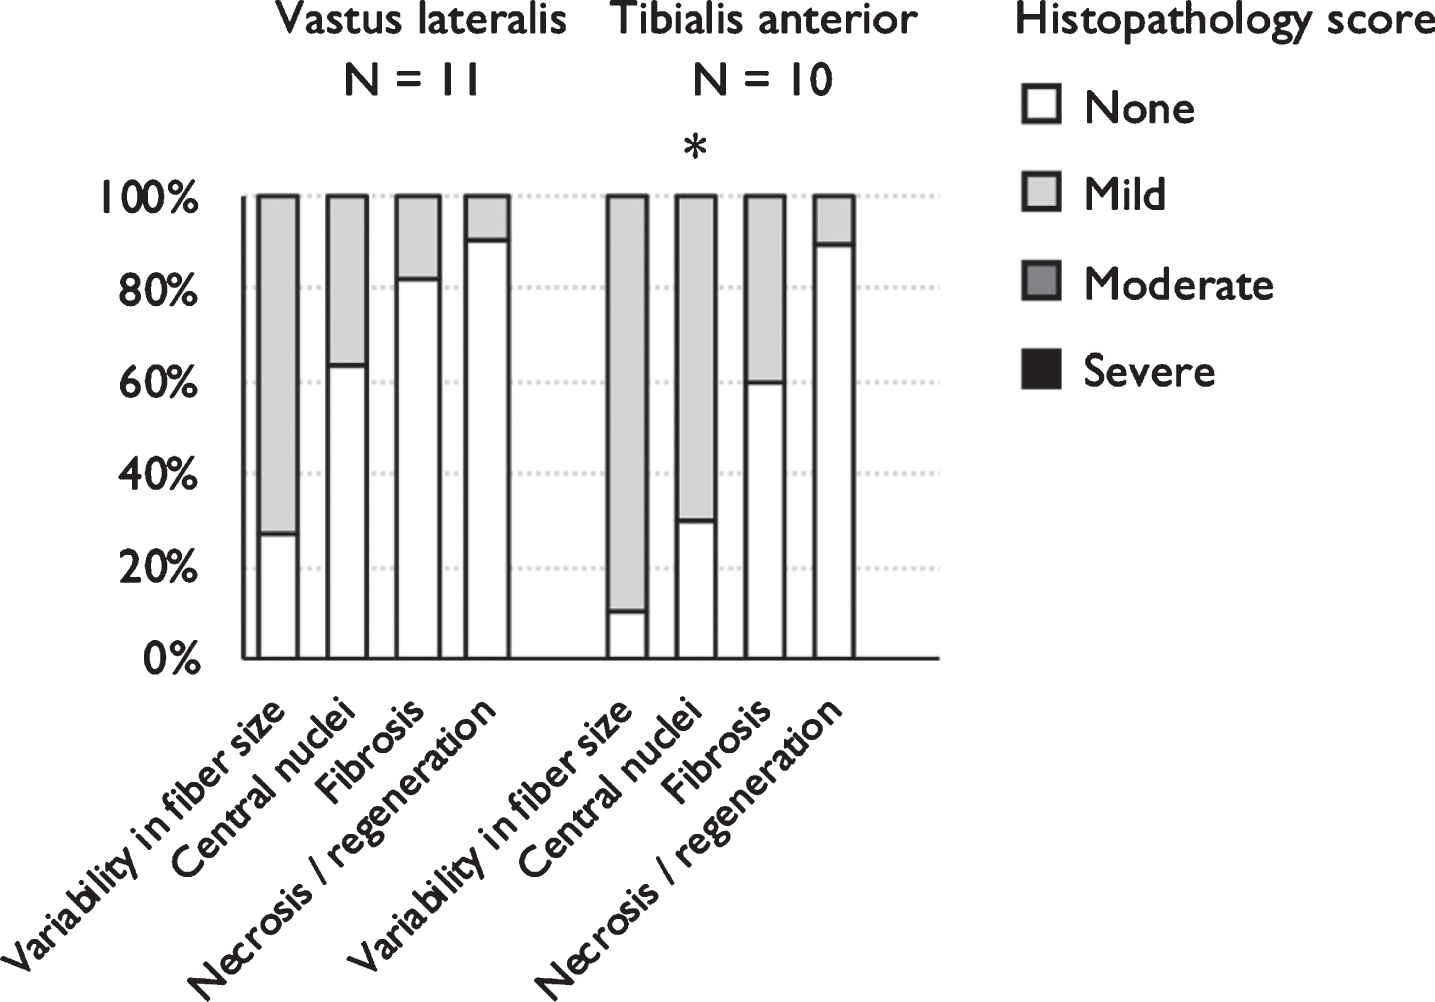 Mild histopathological changes are common in healthy middle-aged controls. Distribution of the presence and severity of histopathology sub scores for healthy control vastus lateralis and tibialis anterior muscle biopsies. The amount of central nucleation was significantly increased in tibialis anterior compared to vastus lateralis control biopsies. *p = <0.05 **p = <0.01 / ***p < 0.001 compared to vastus lateralis.